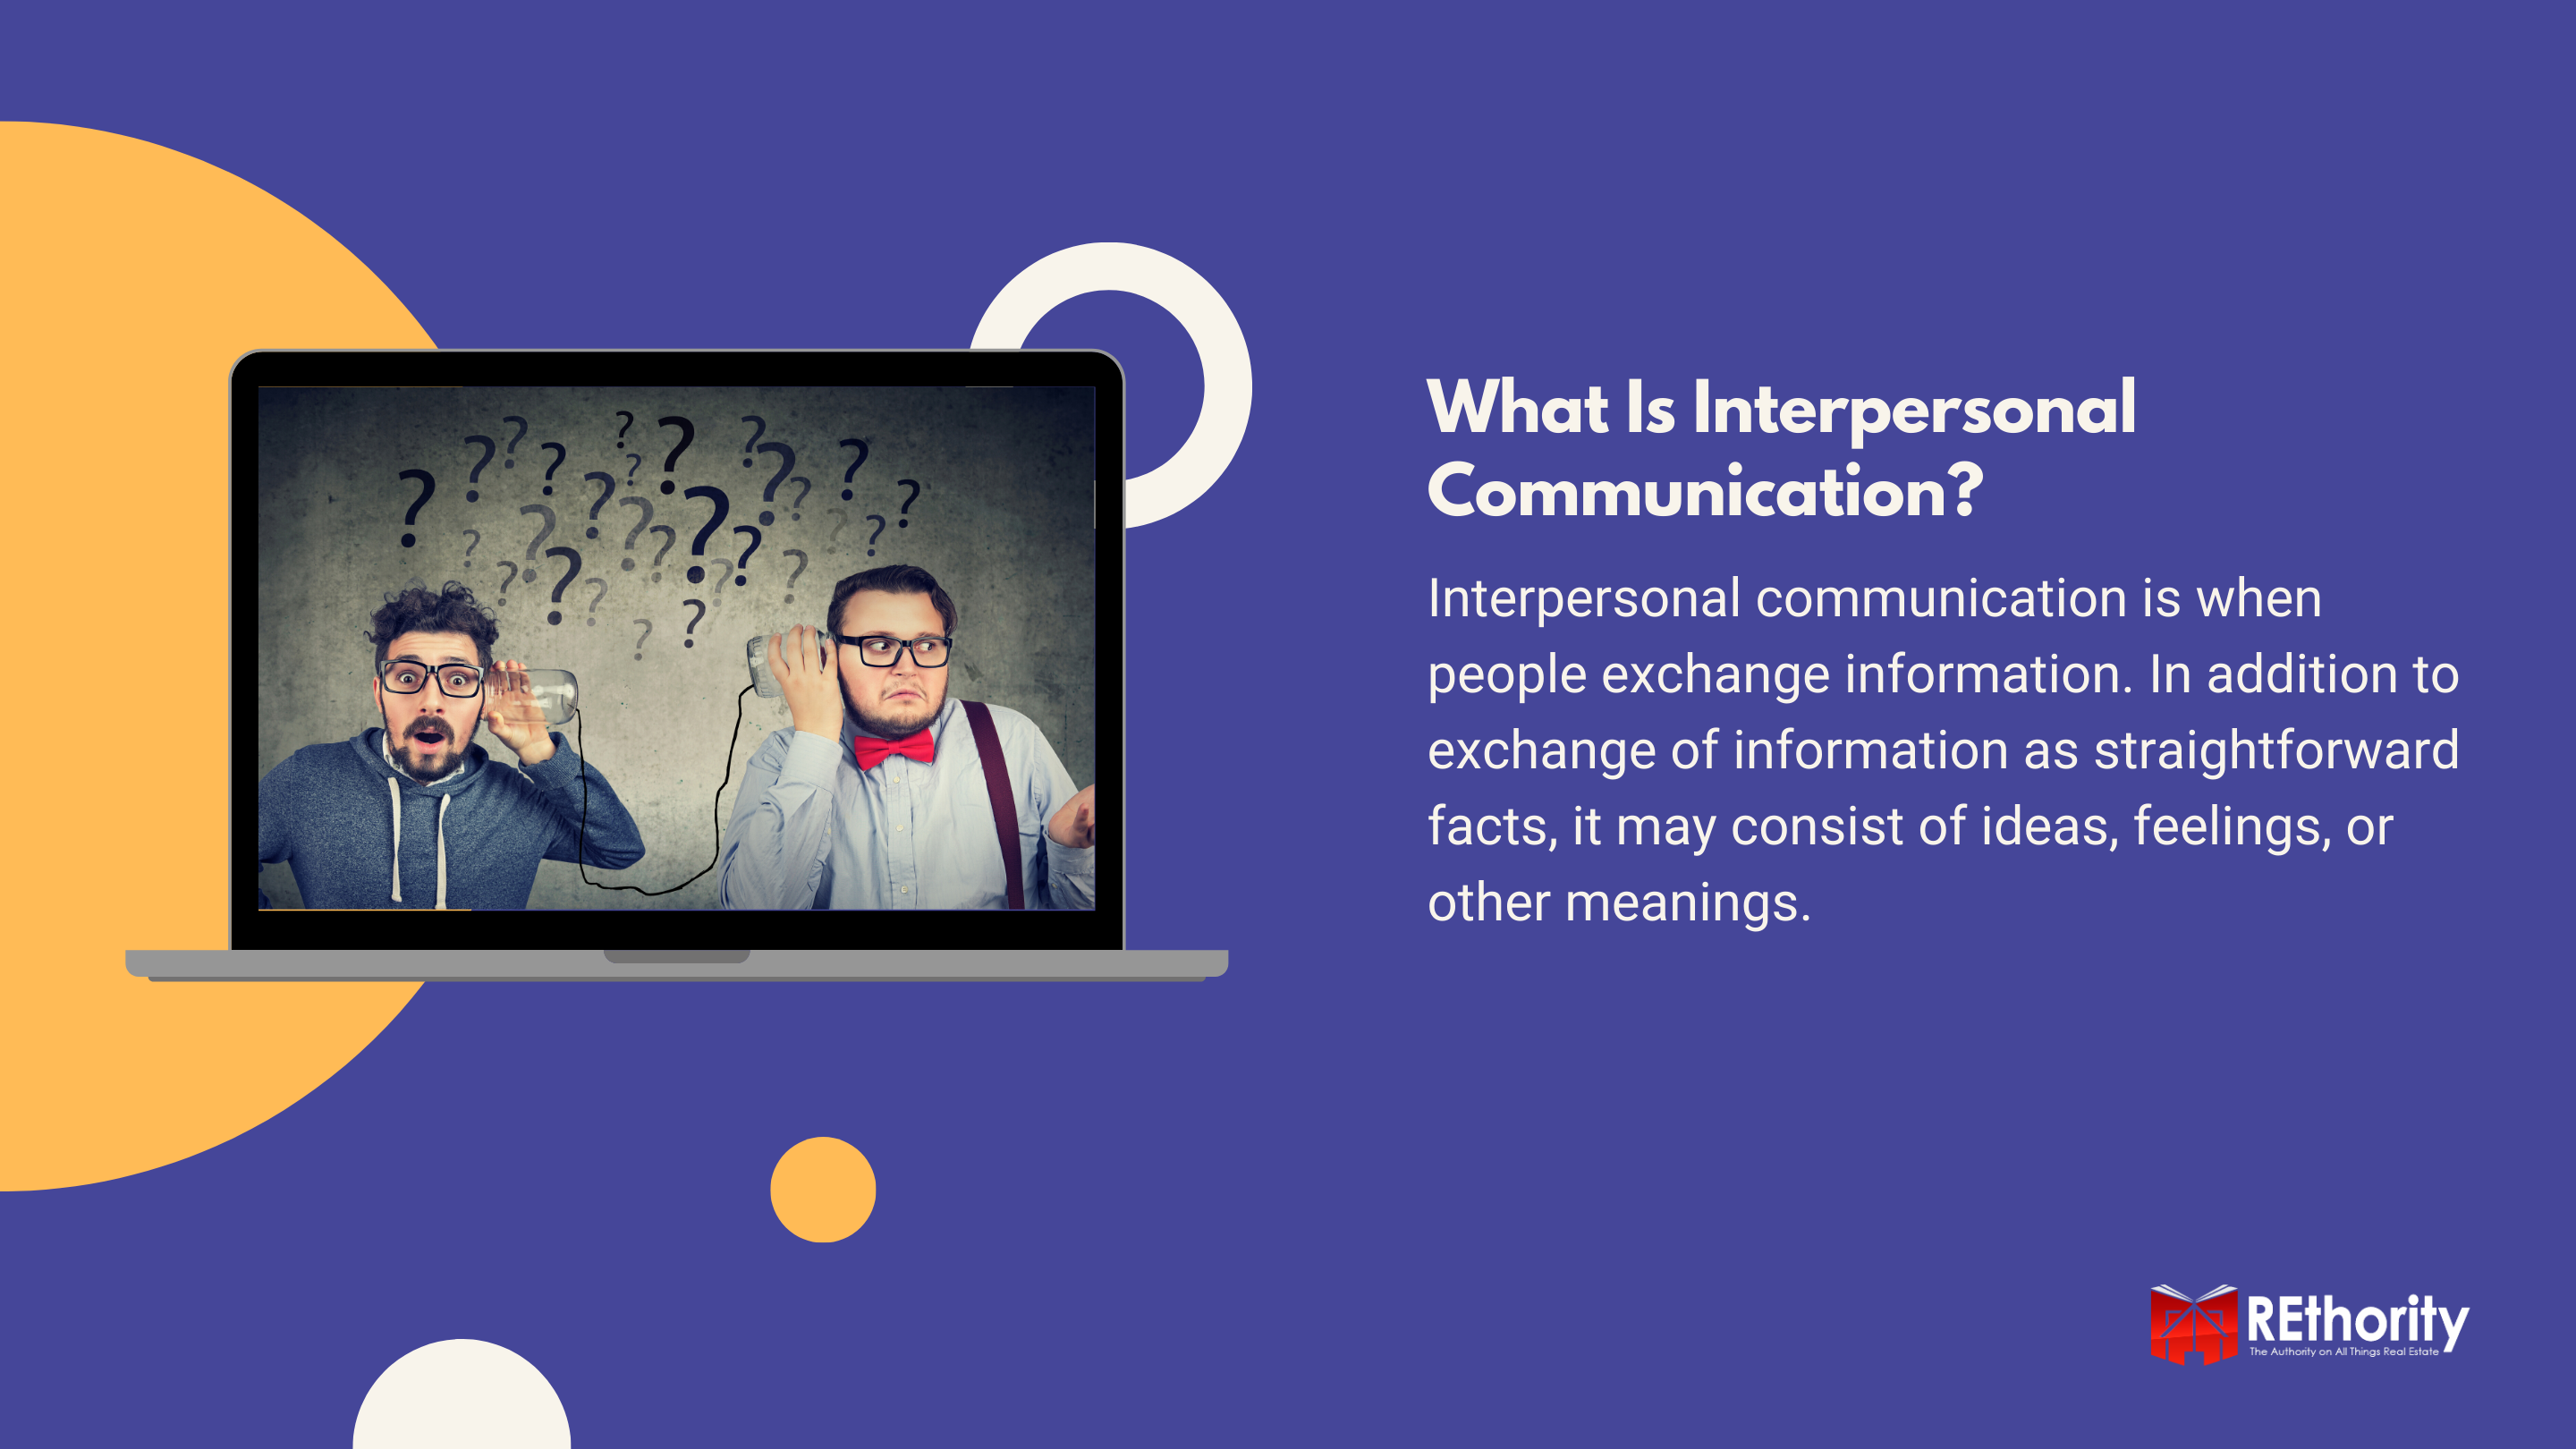 What Is Interpersonal Communication graphic with a photo of two people talking on a laptop screen and an explanation of the services on the right